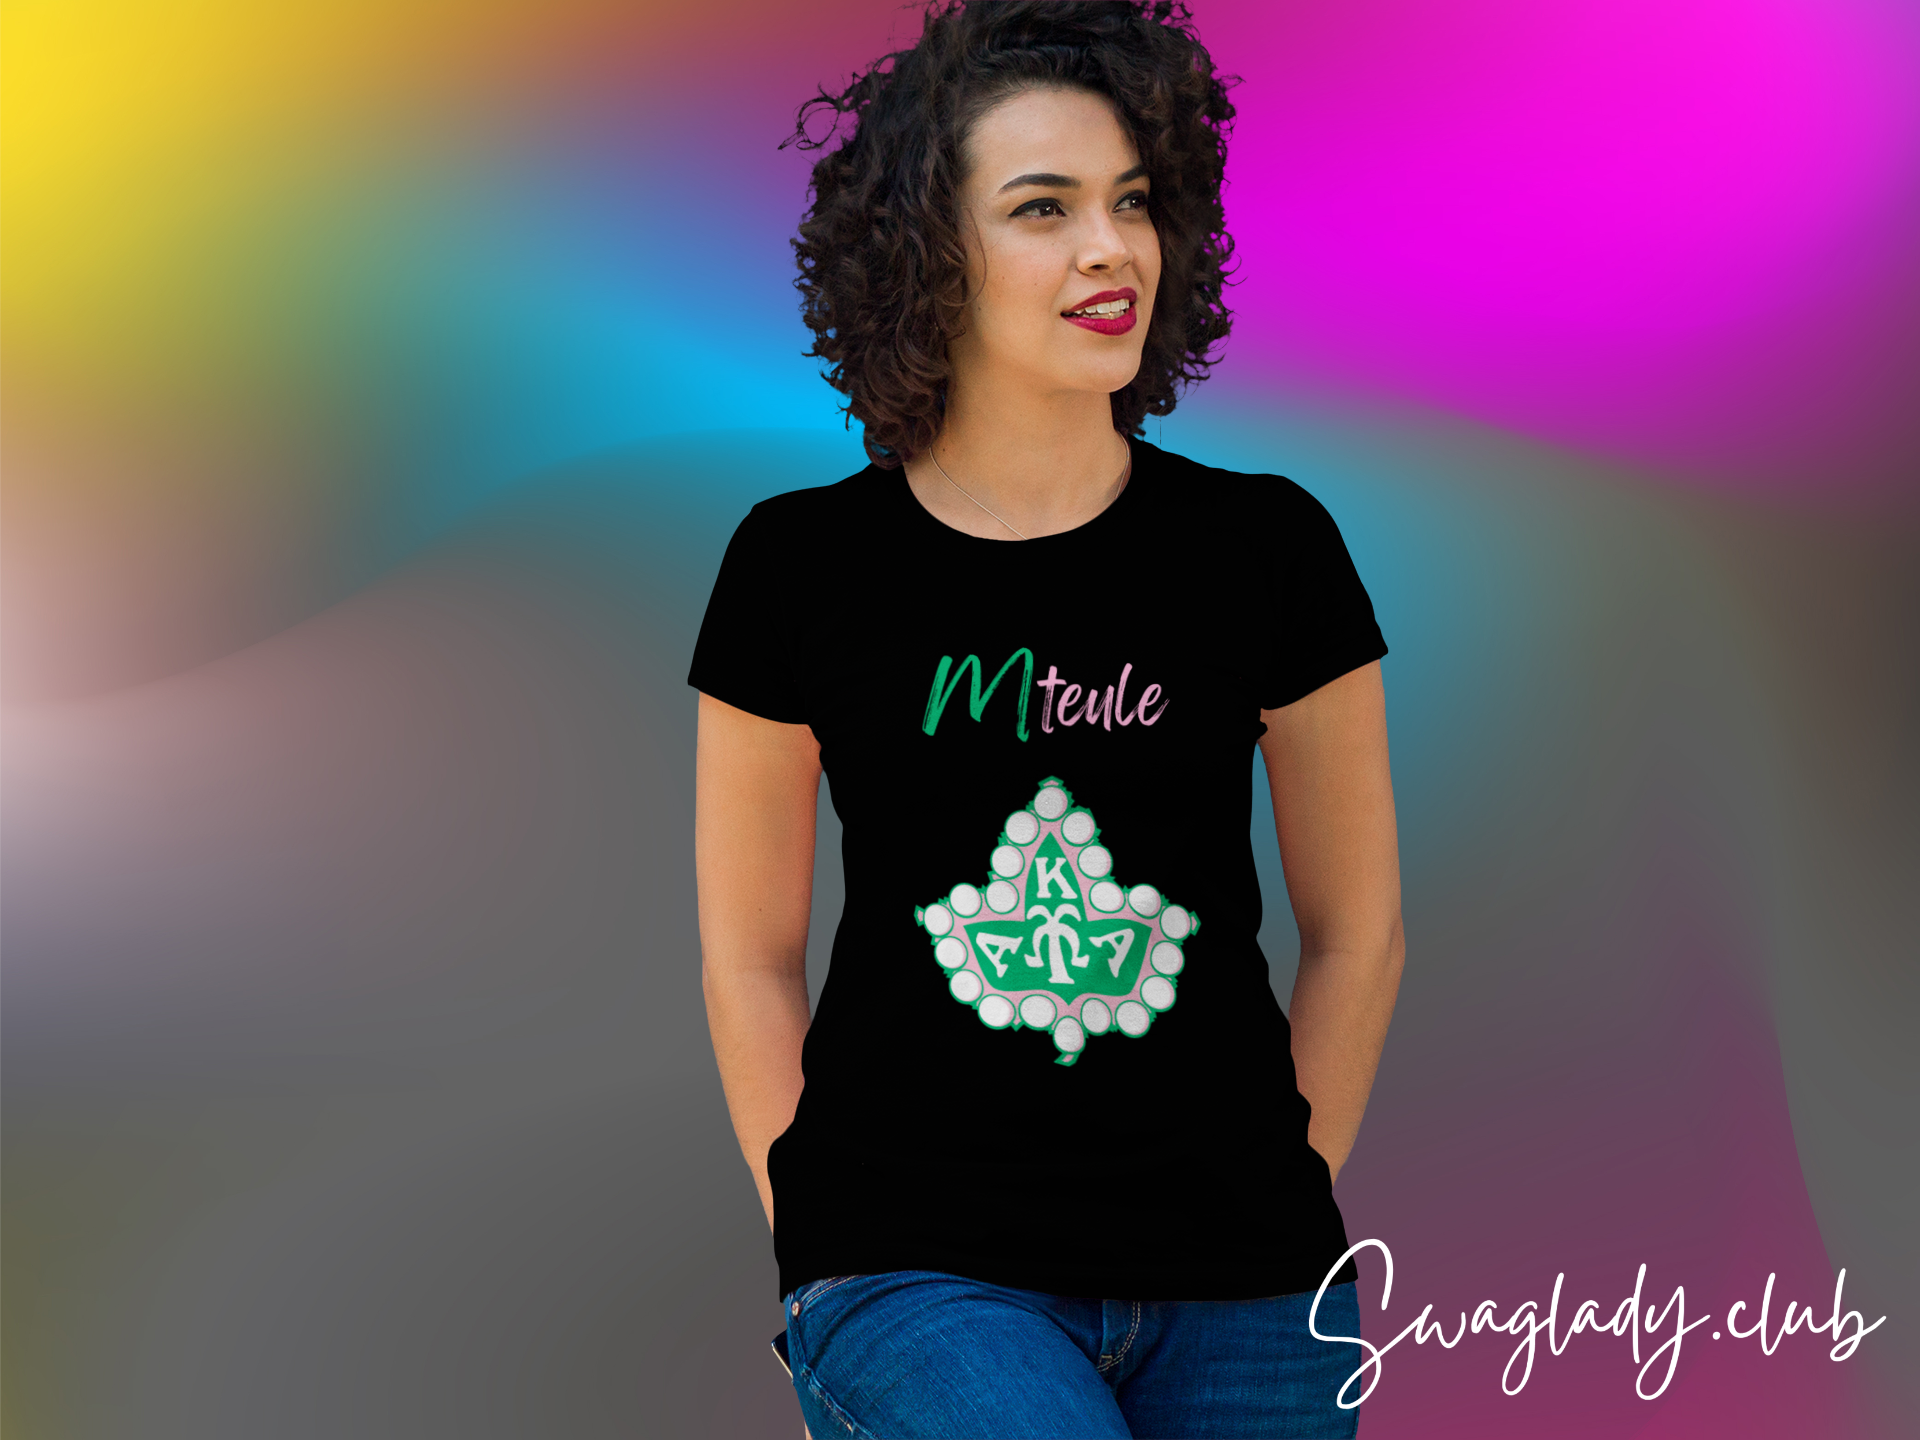 Mteule 37th Anniversary IVY Unisex t-shirt Champagne #13